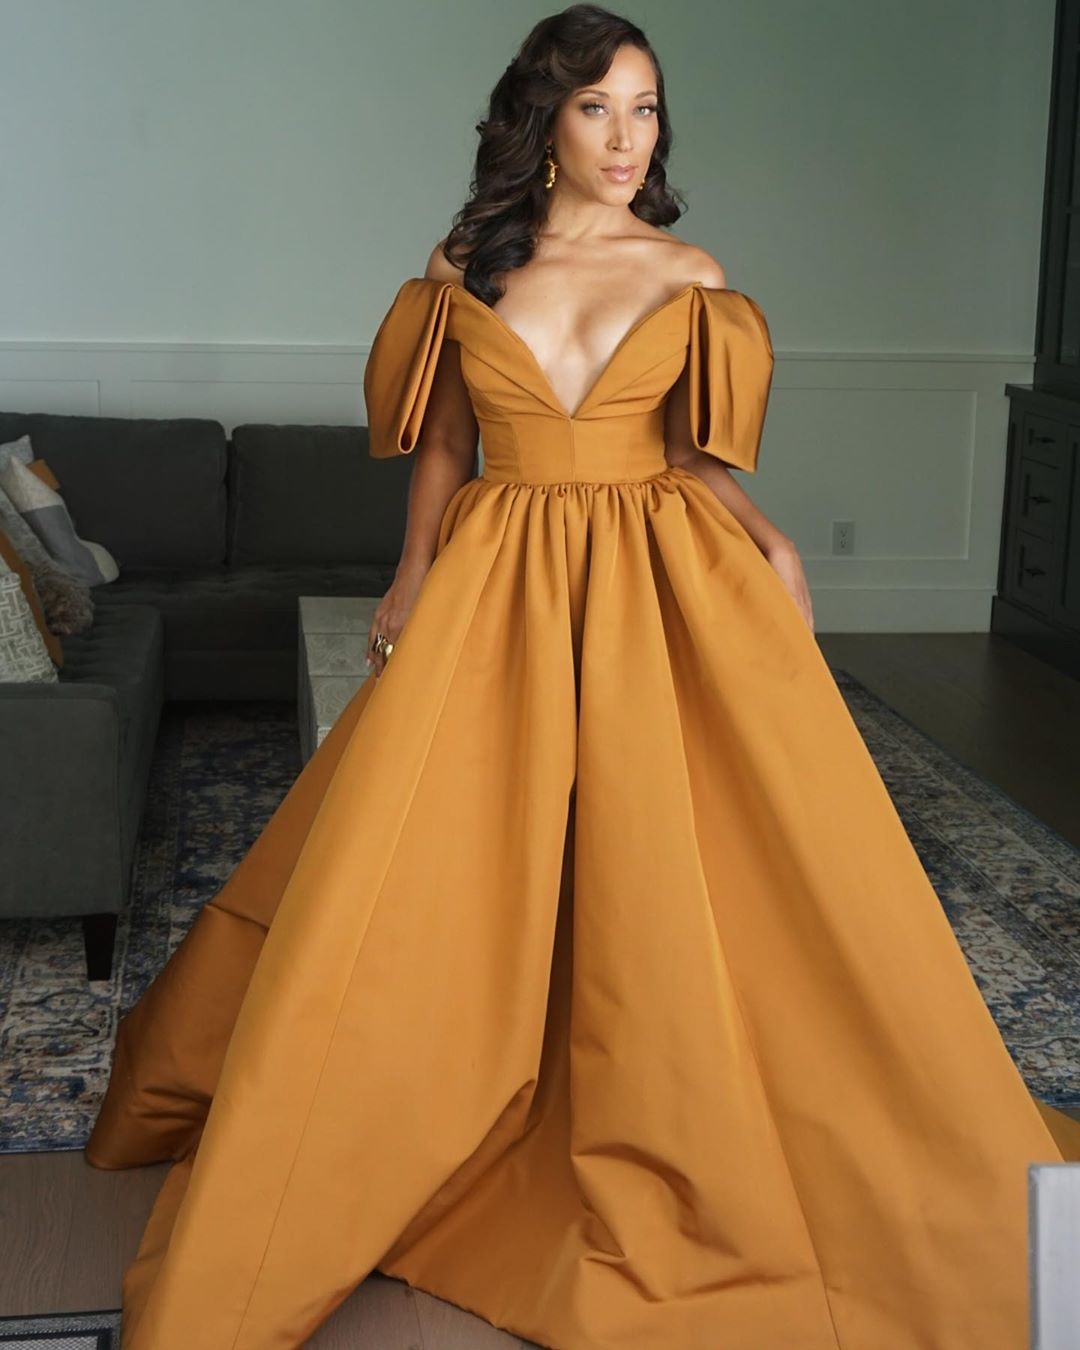 emmy-awards-2020-fashion-best-dressed-winners-robin-thede-style-rave